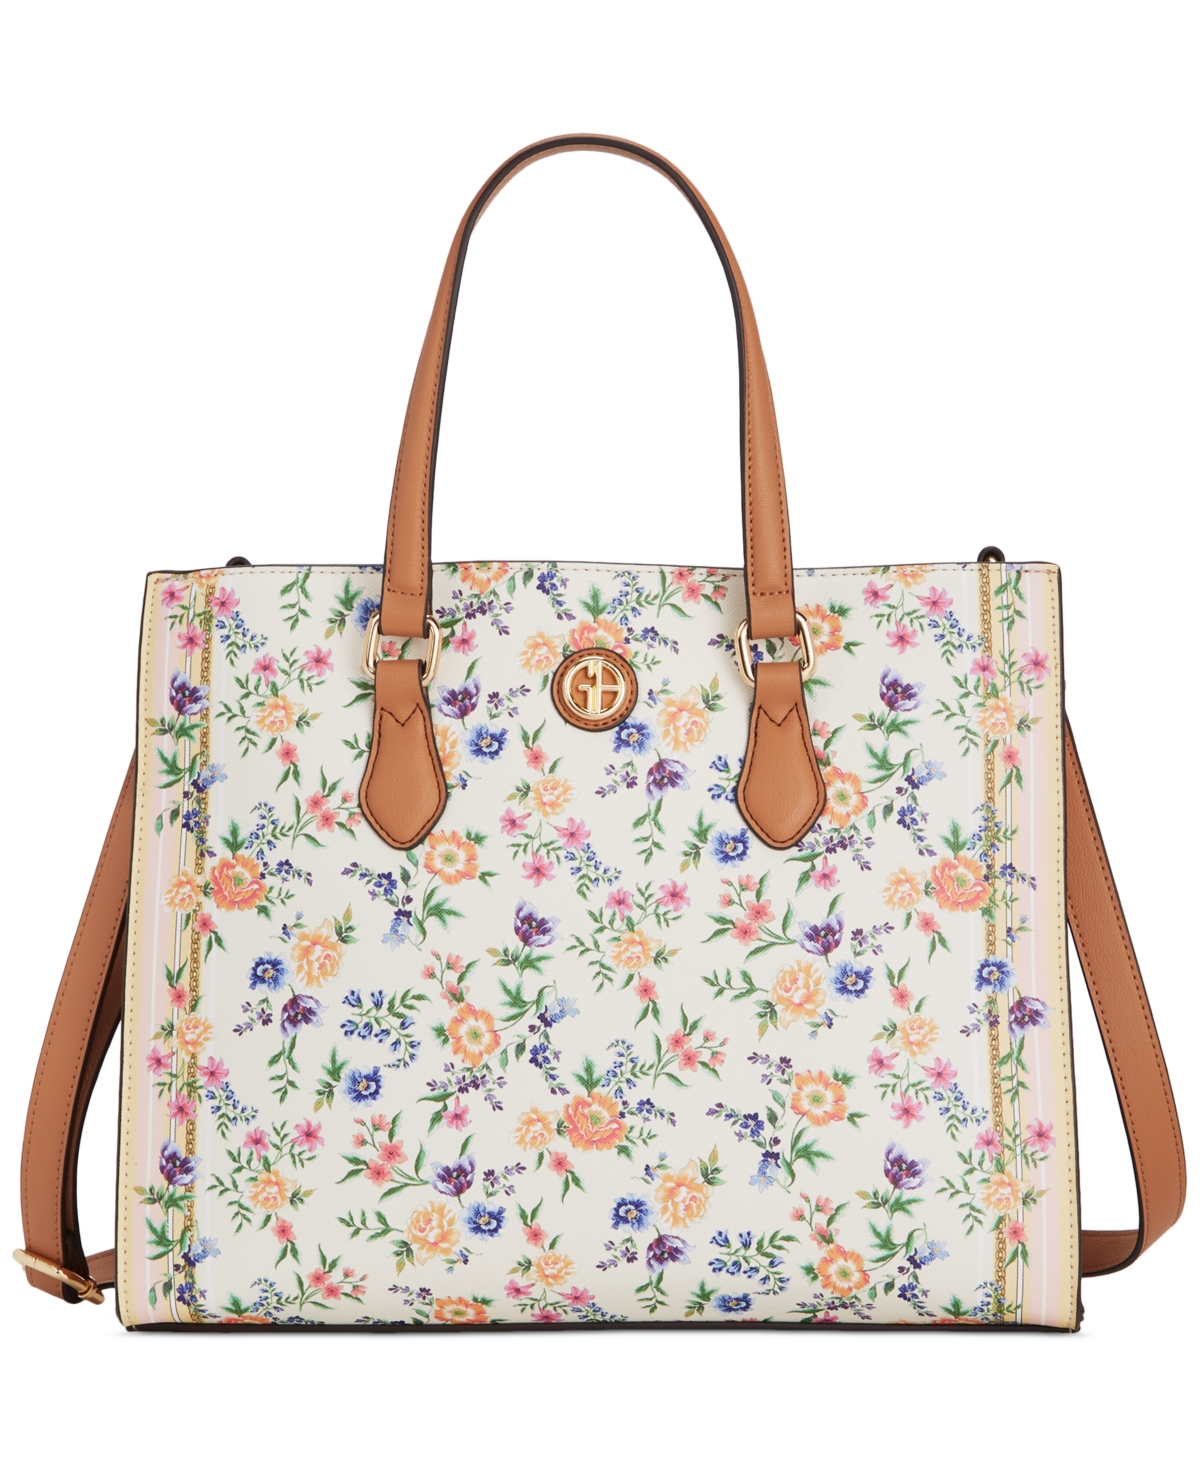 Saffiano Pastel Floral Medium Book Tote, Created for Macy's - Floral Multi